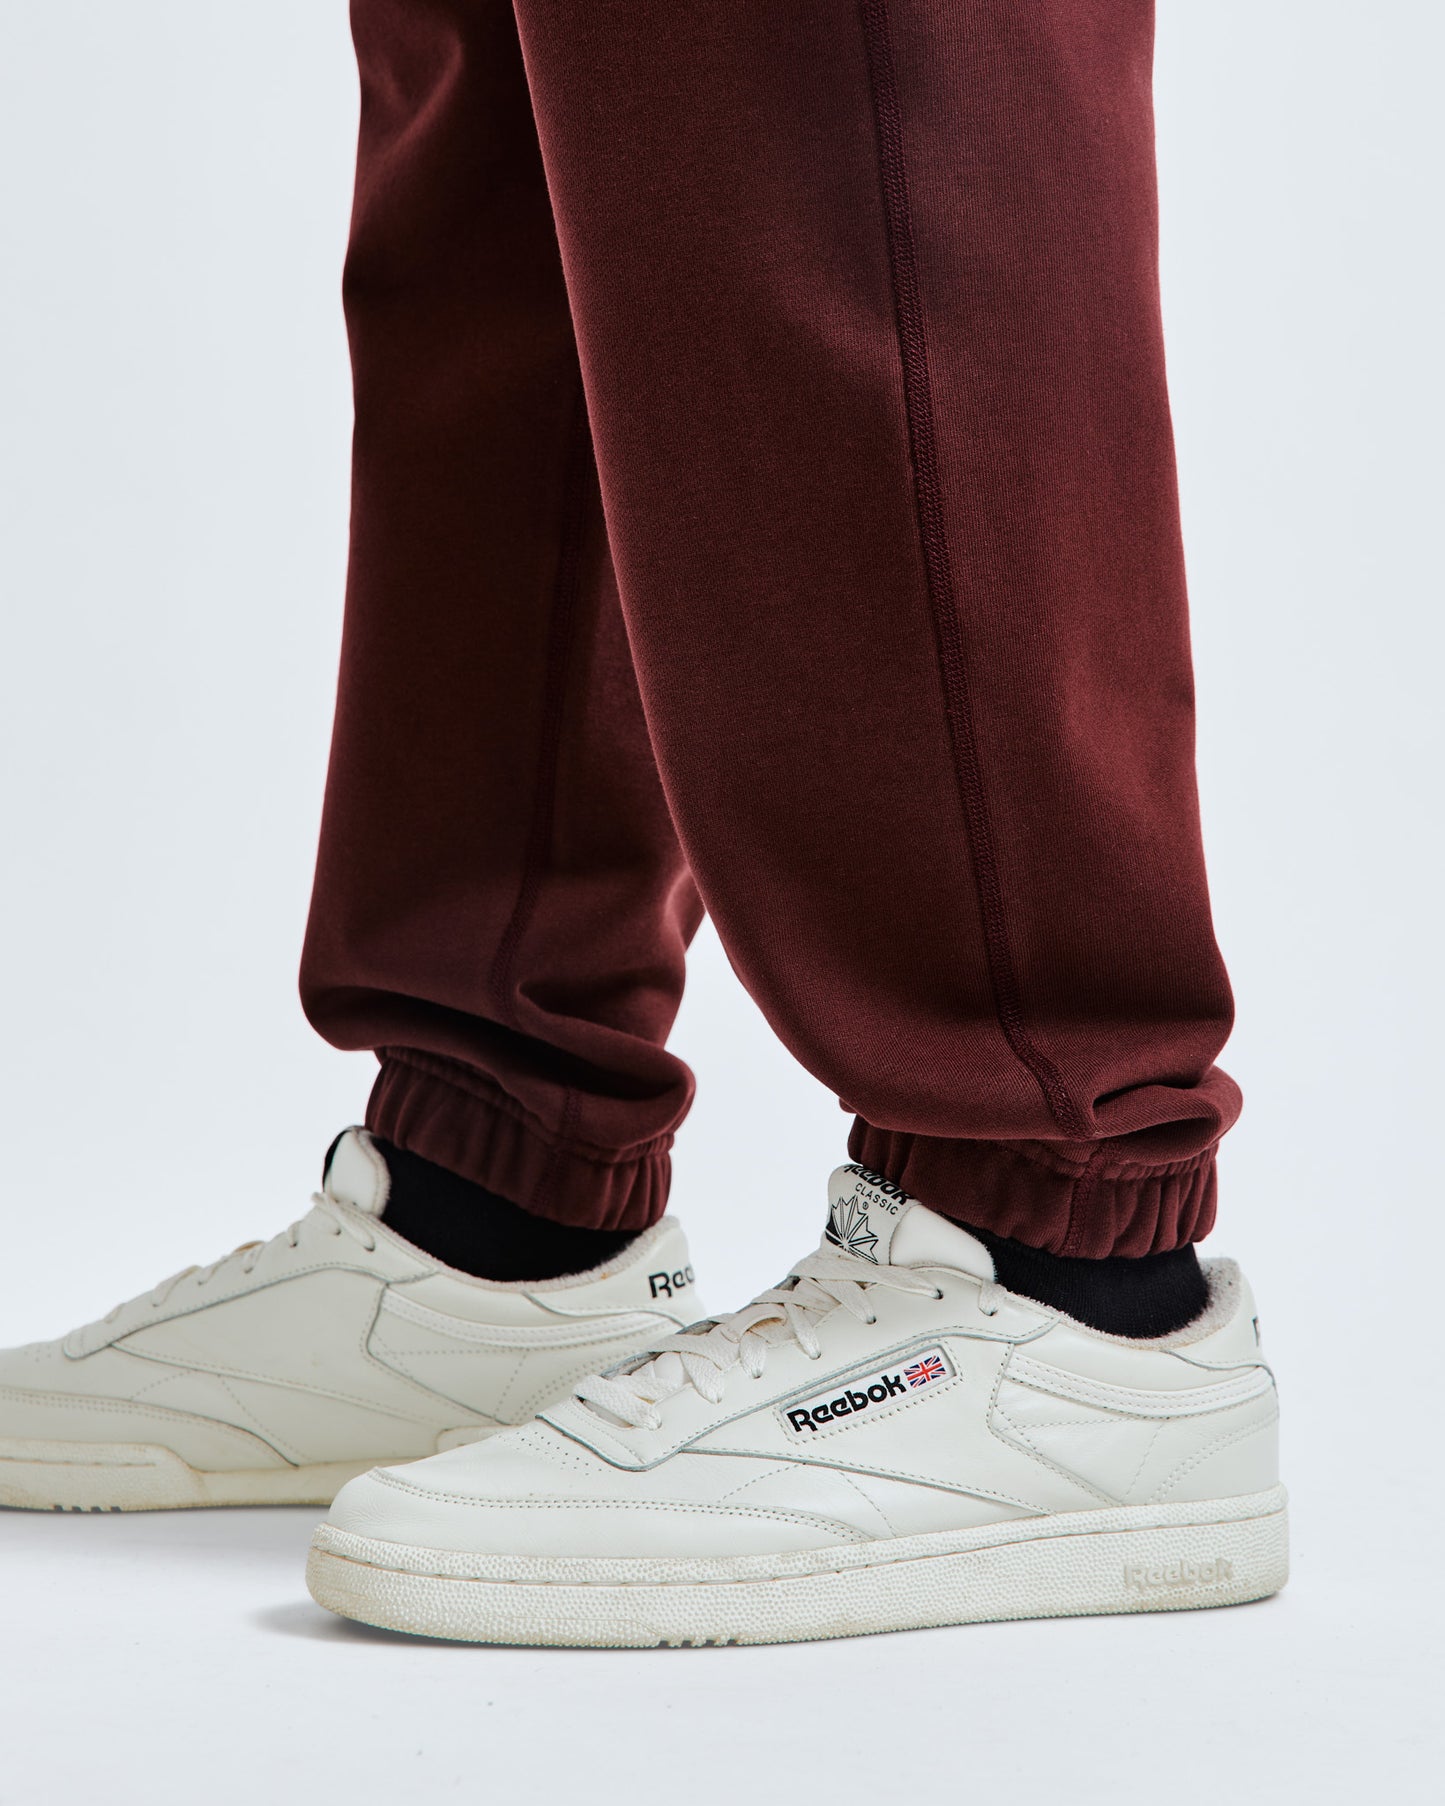 Midweight Terry Atlantic Cuffed Sweatpant